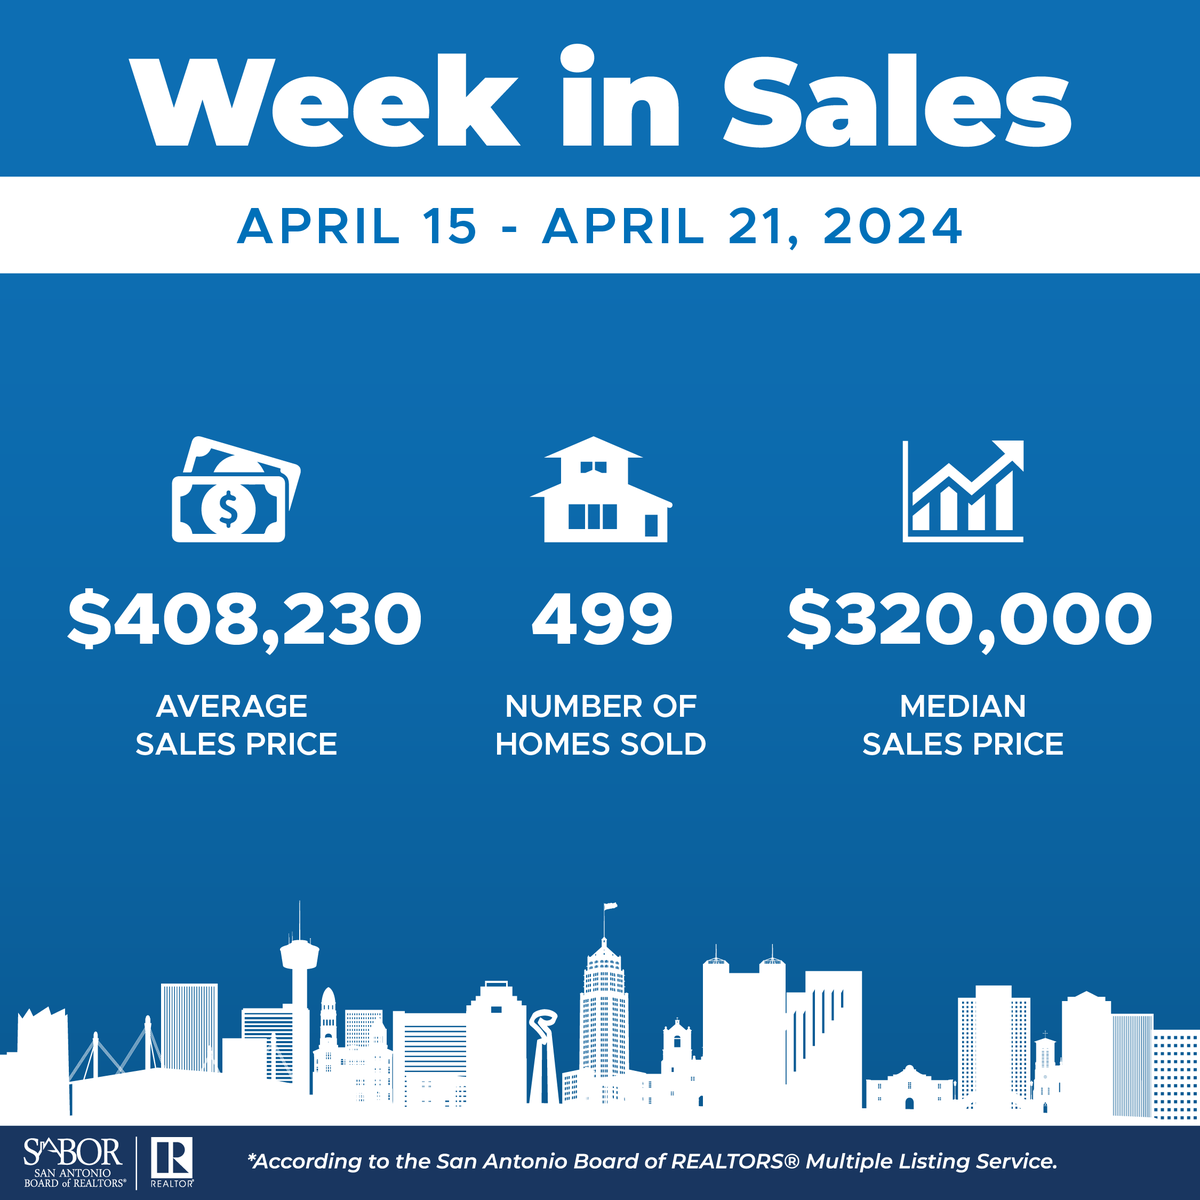 WEEK IN SALES | Here's a look at your most recent week in sales. Find more housing statistics here: bit.ly/3C0CafR